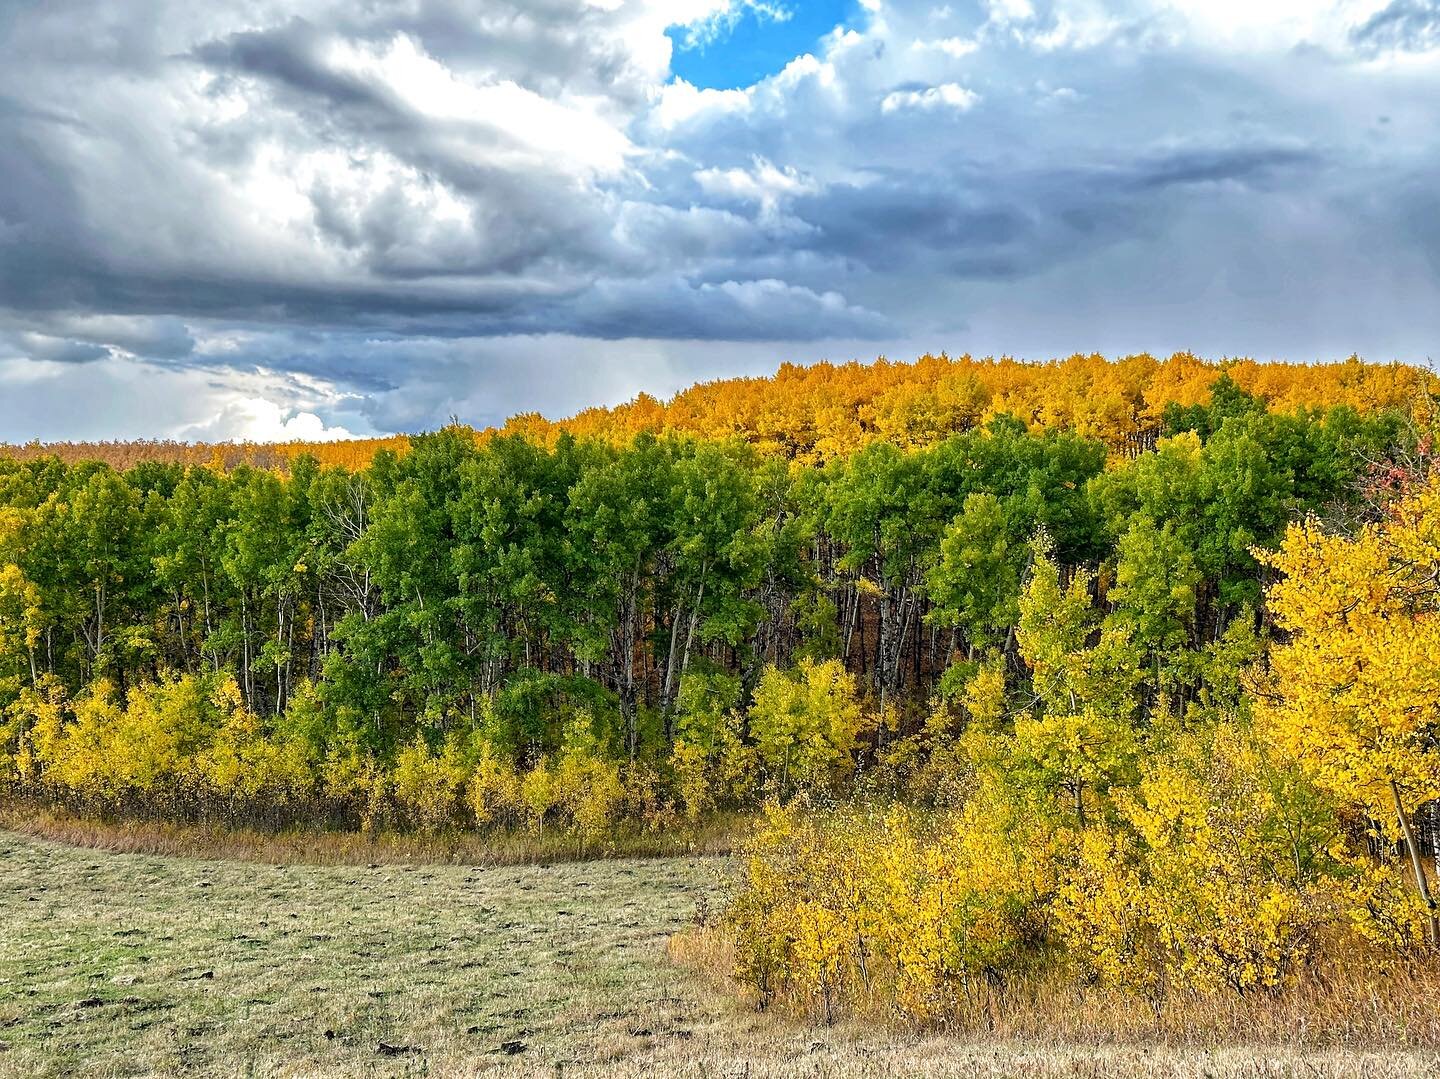 I think some of these trees are trying to deny the inevitable&hellip;
#leaveschanging #fall #albertafoothills